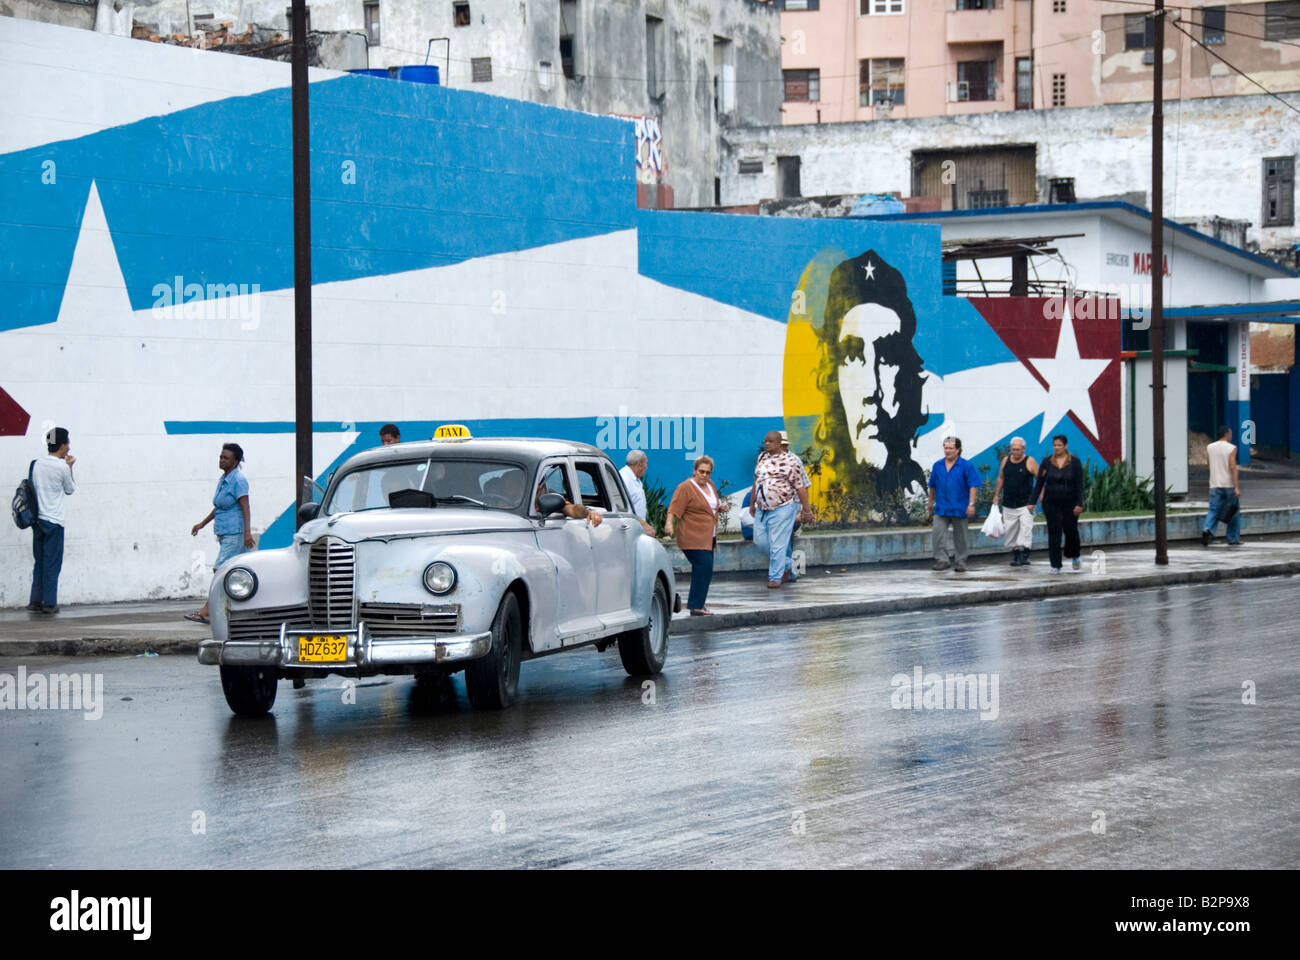 Vintage Taxi cab passing by a mural of Ernesto Che Guevara during time of embargo in Cuba Central Havana Cuba Stock Photo